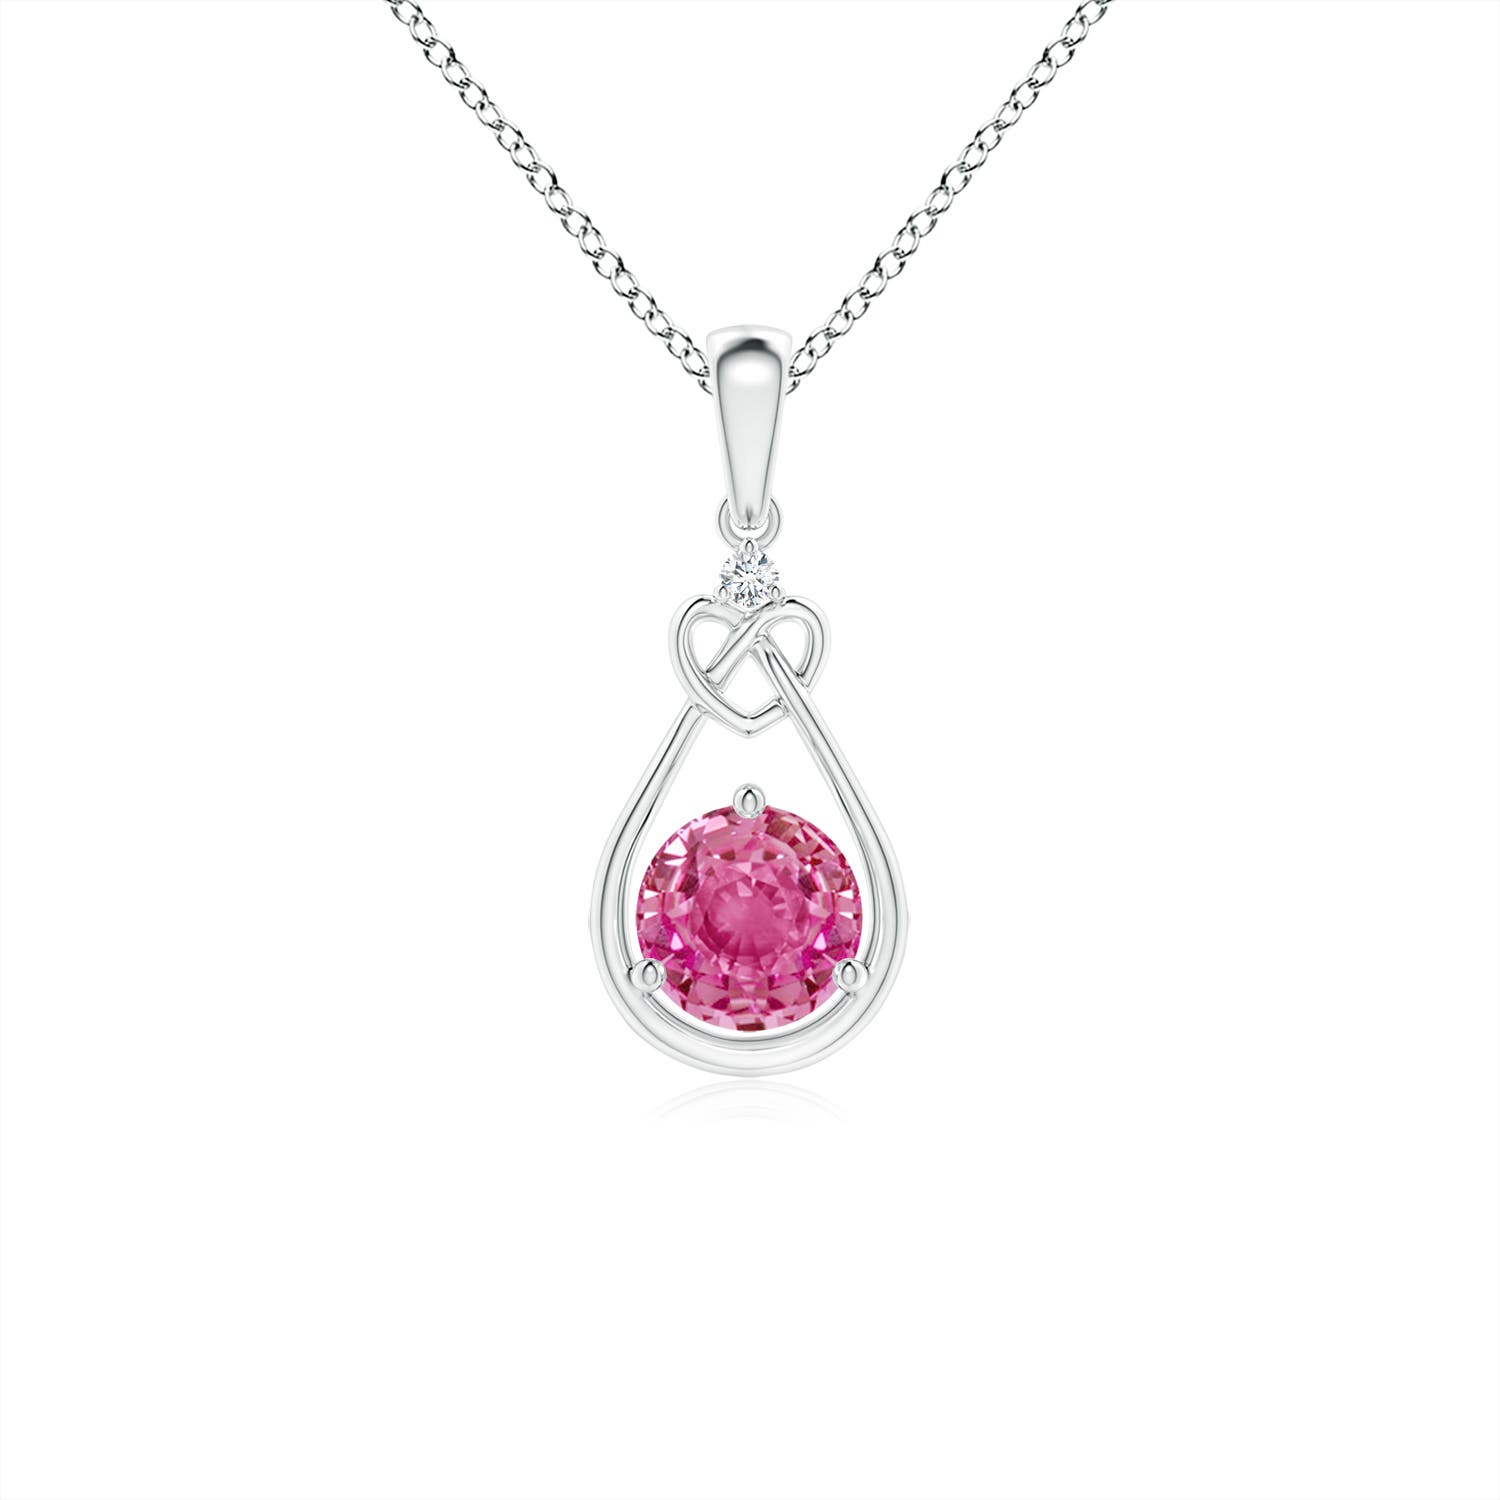 AAA - Pink Sapphire / 0.61 CT / 14 KT White Gold